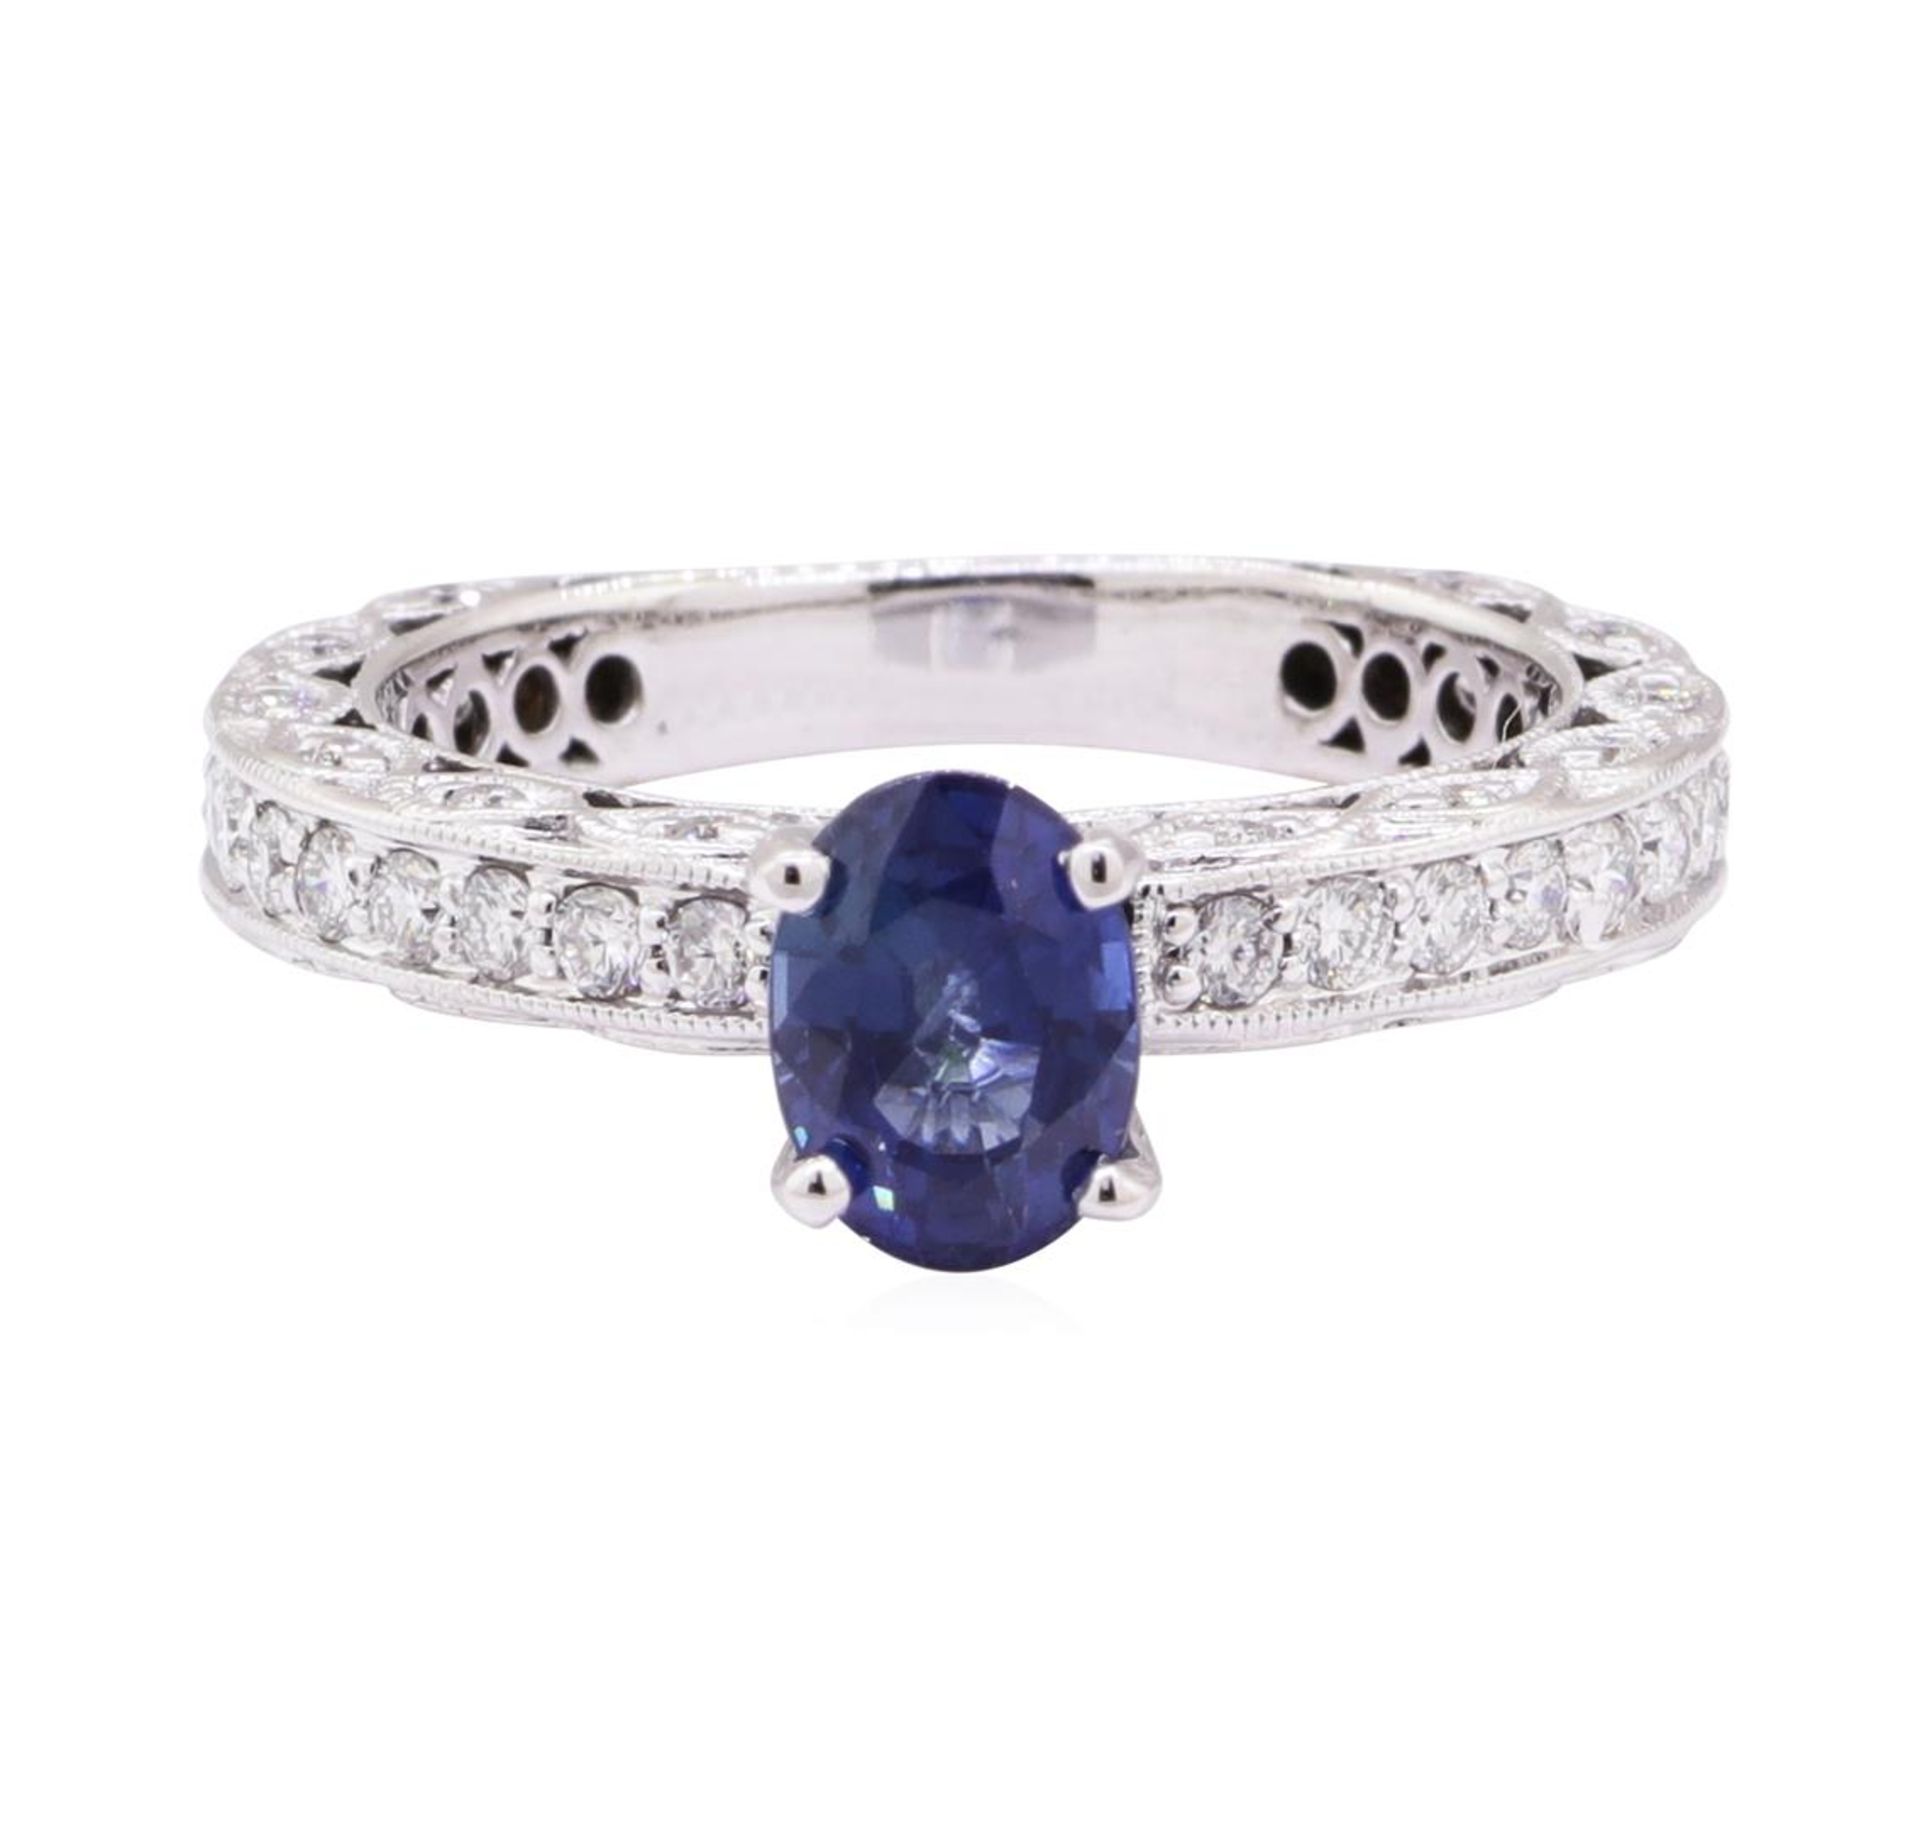 1.87 ctw Blue Sapphire And Diamond Ring - 14KT White Gold - Image 2 of 5